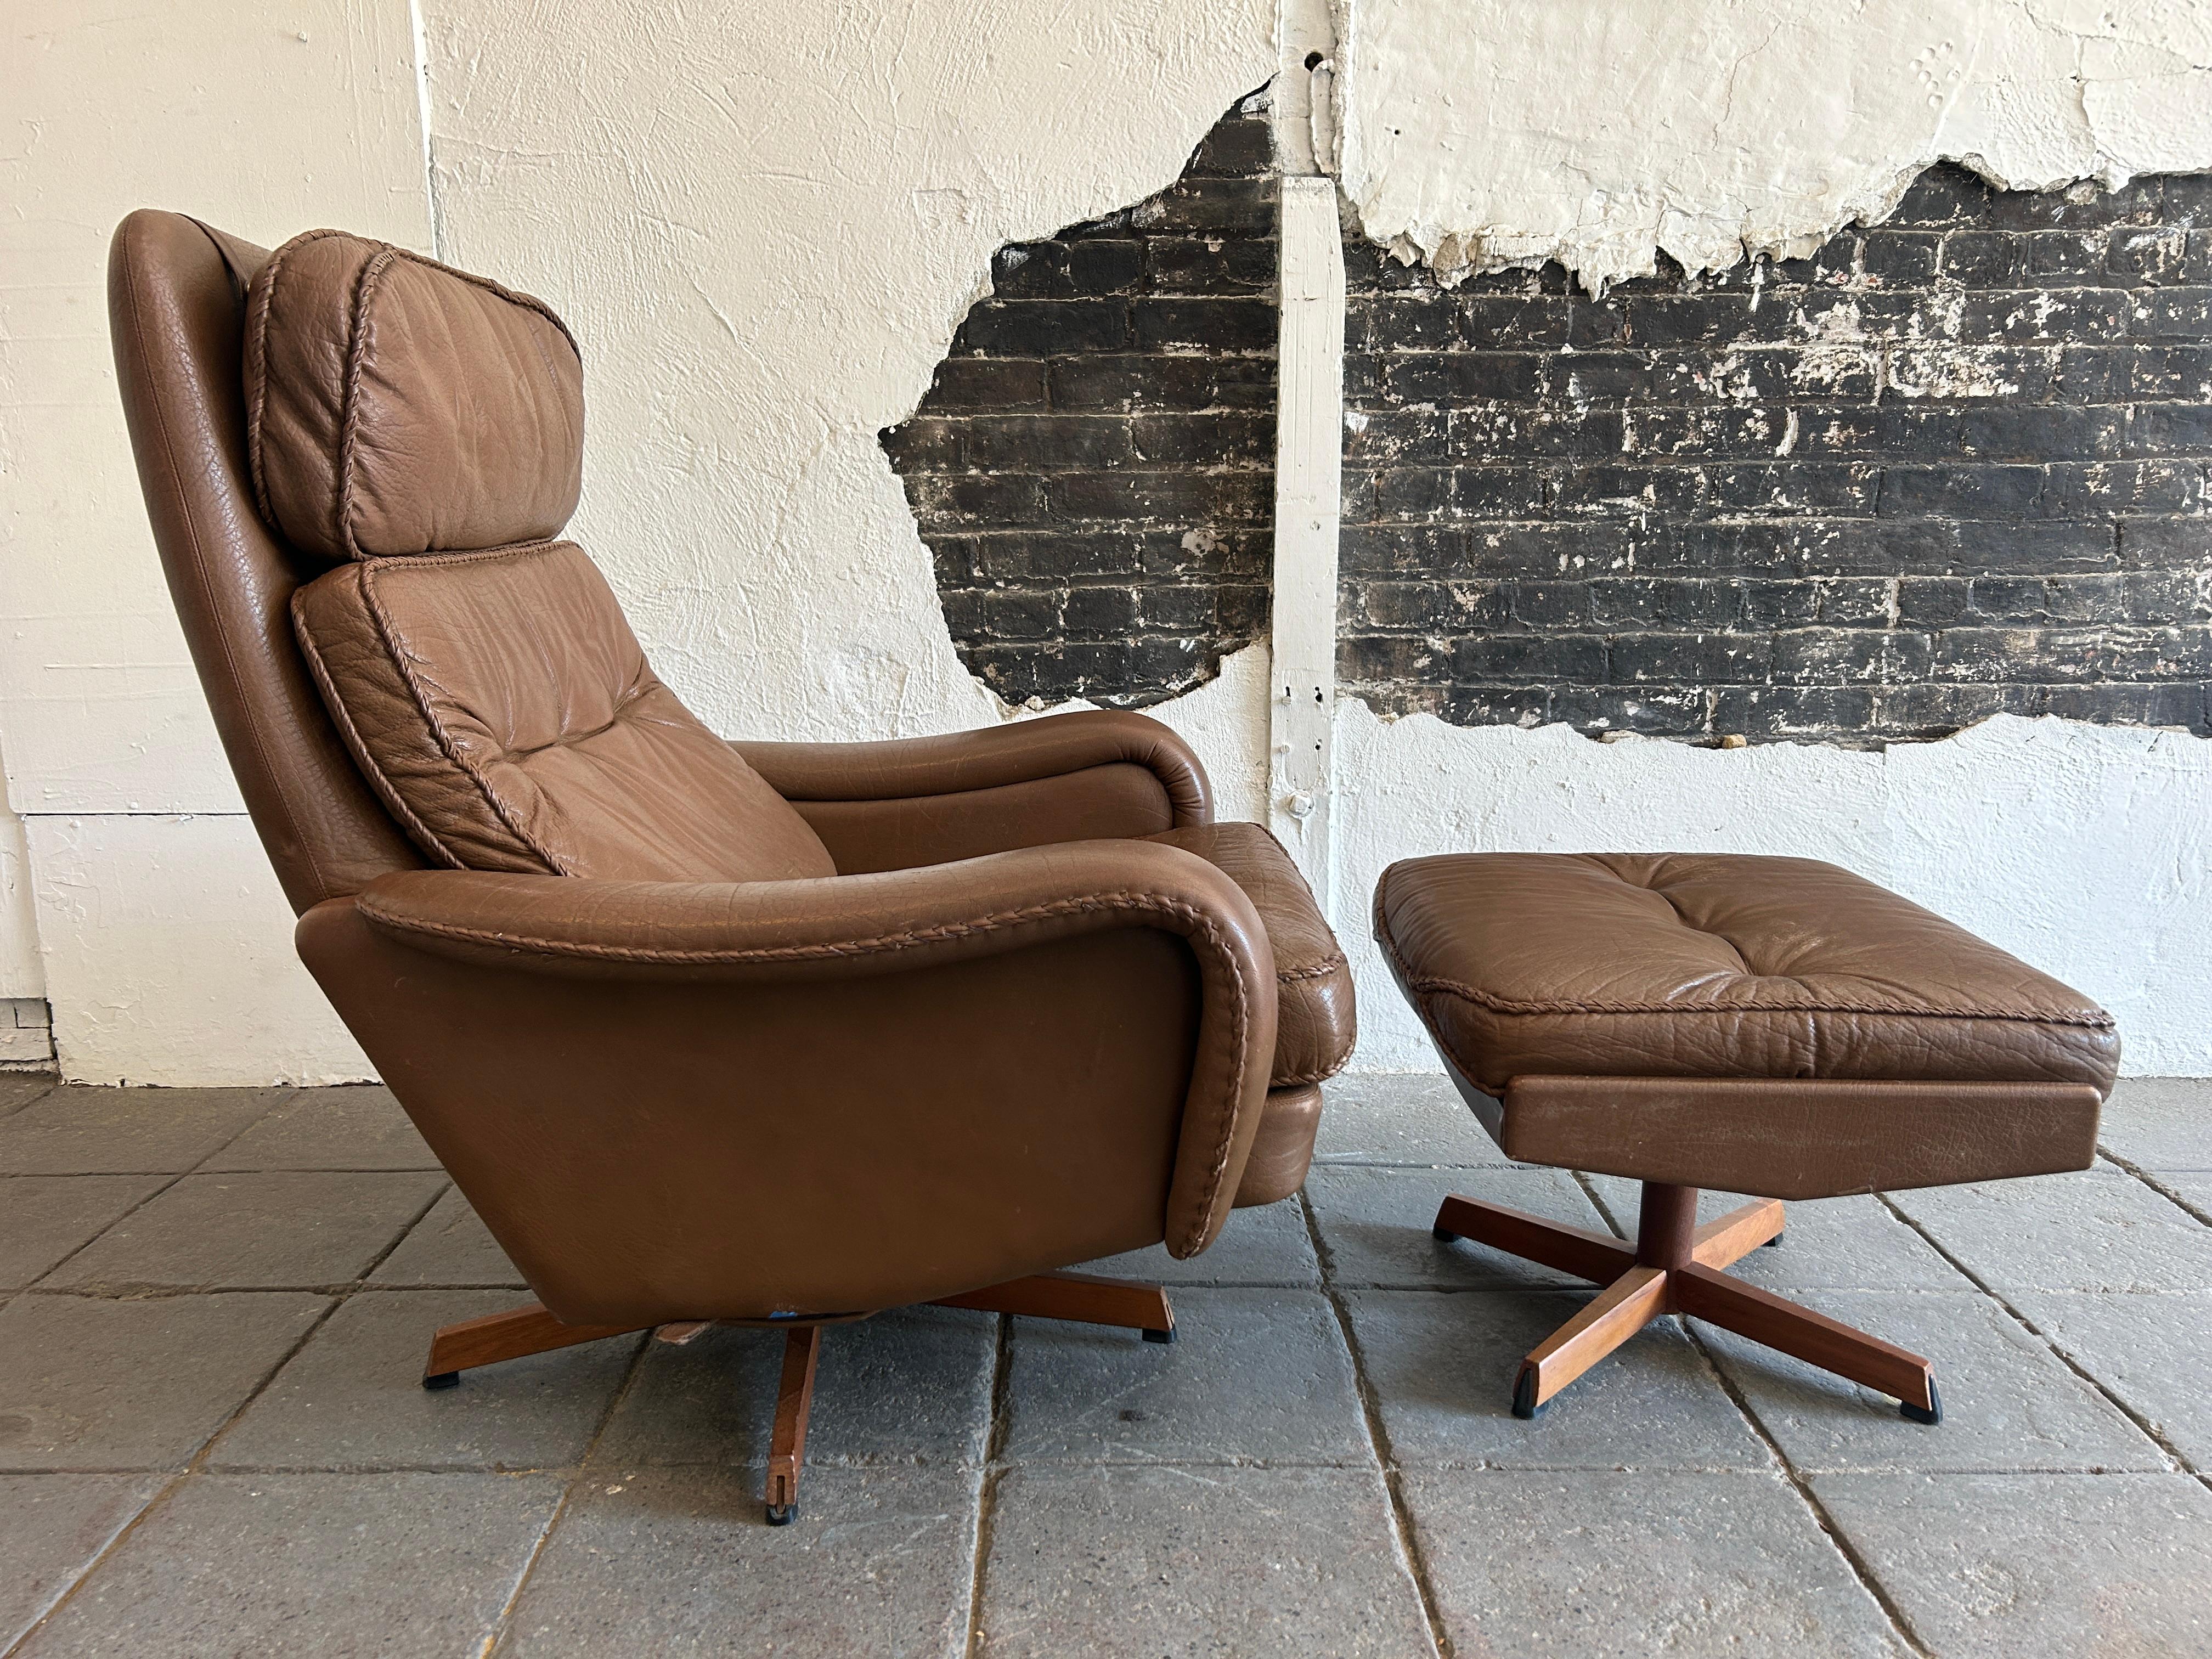 Midcentury Danish Modern brown Buffalo leather lounge chair and ottoman by Madsen & Schubell. Leather has woven leather stitching. Danish modern chair and ottoman. Teak wood bases, removable leather cushions and ottoman with cushion, lounge chair is